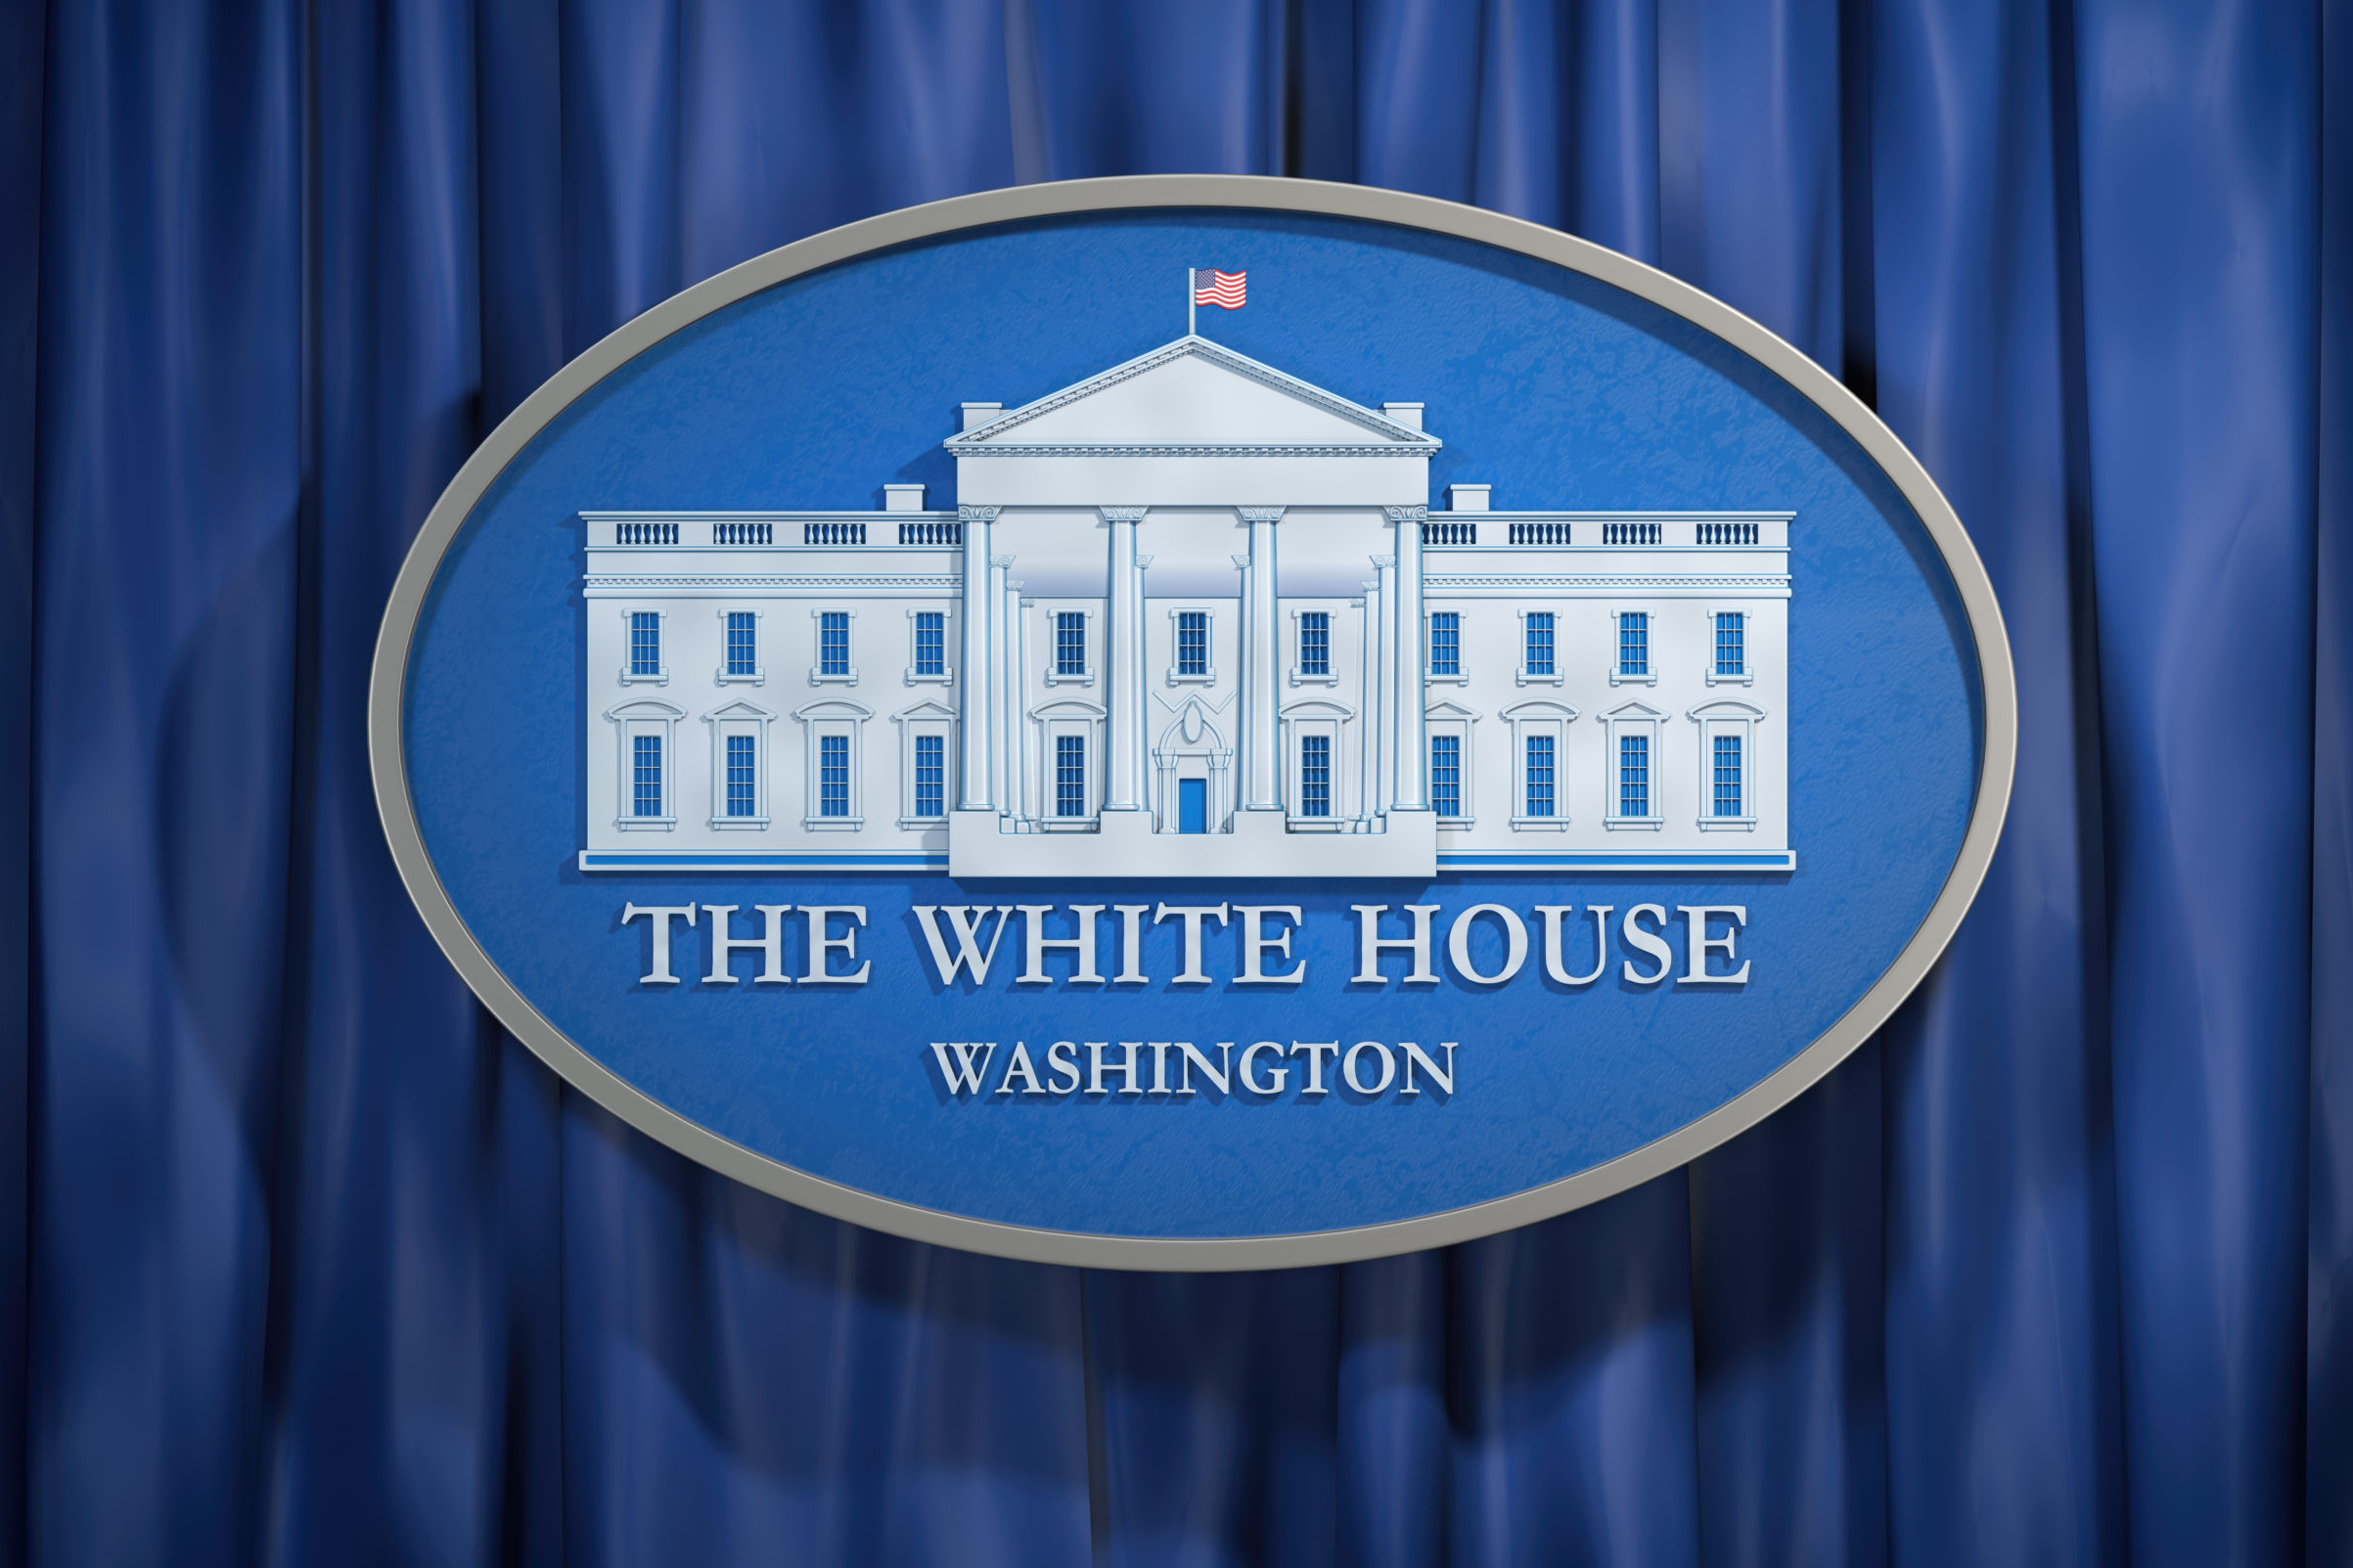 Sign "The White House"